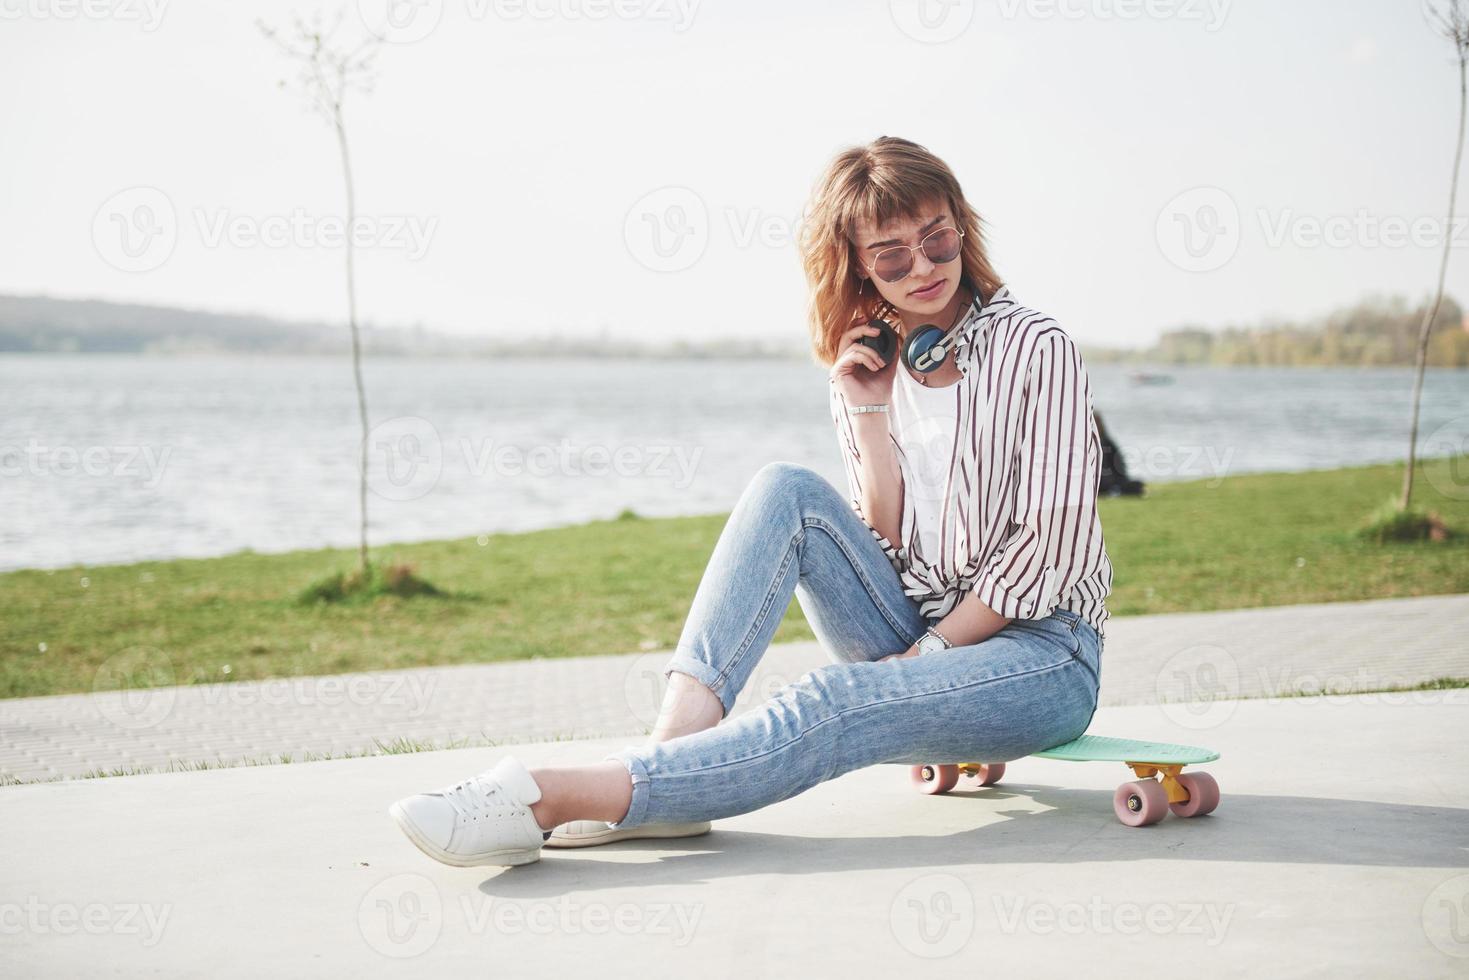 A beautiful young girl is having fun in the park, and riding a skateboard photo